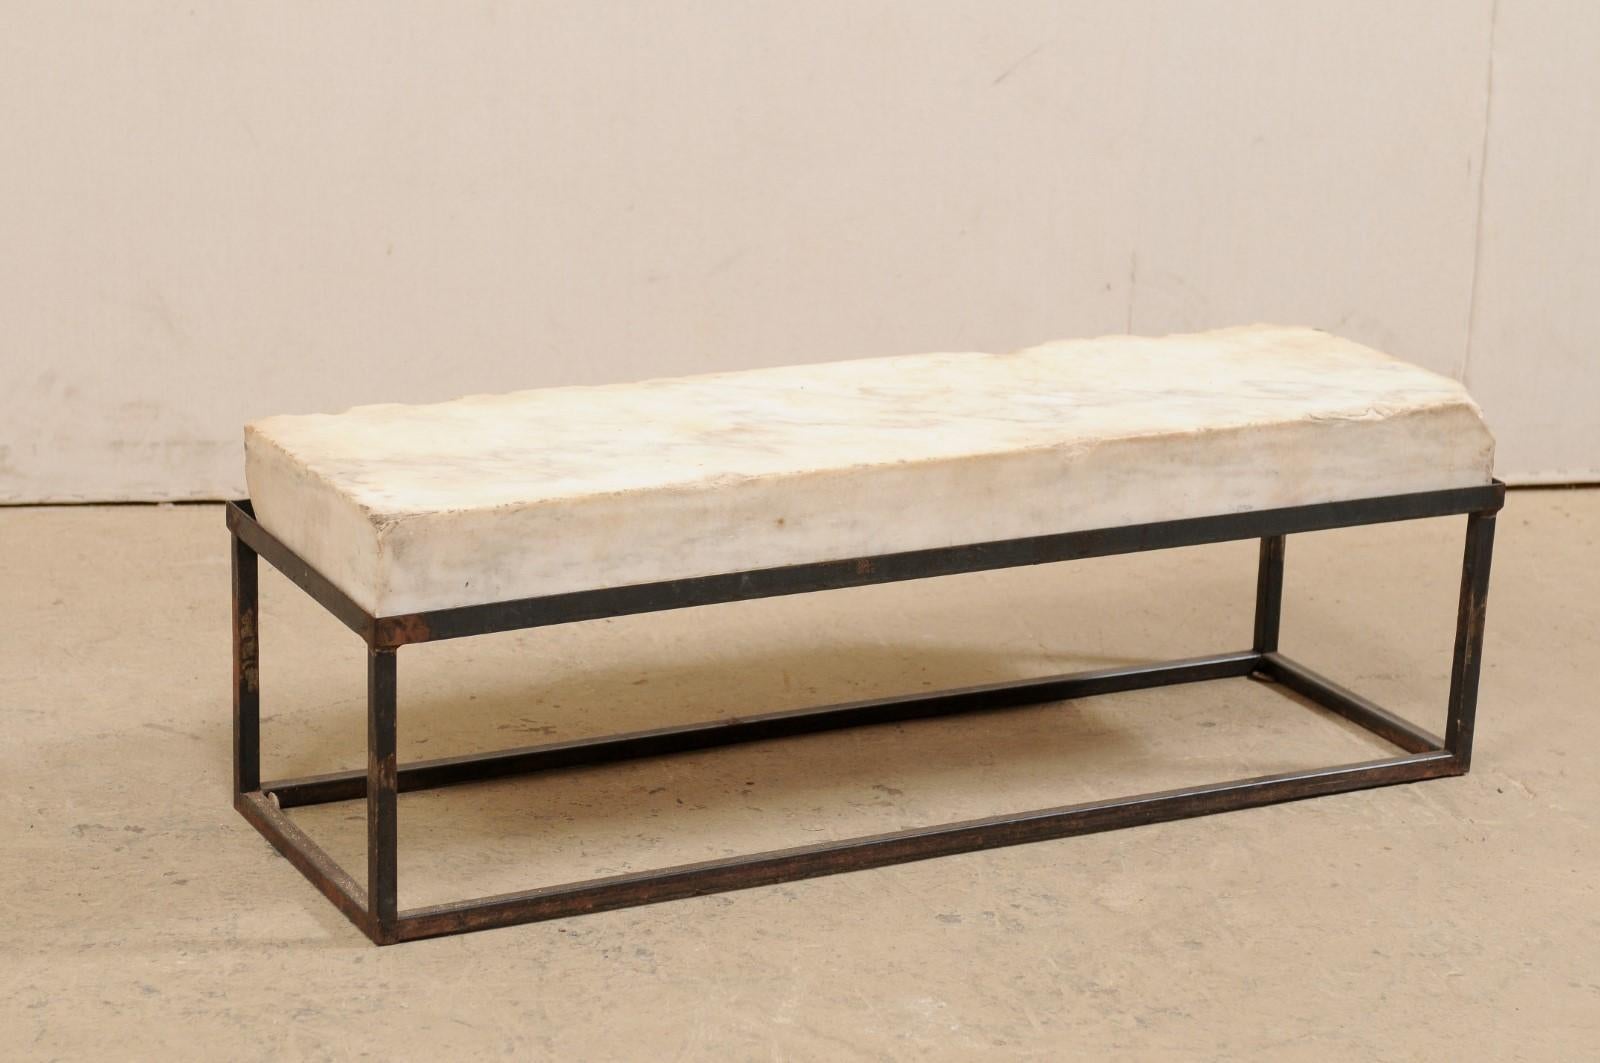 A 19th century European marble slab top coffee table, with custom iron base (which could double as a bench!). This unique coffee table has been fashioned from a thick rectangular-shaped slab of 19th century marble, which is raised on a new custom